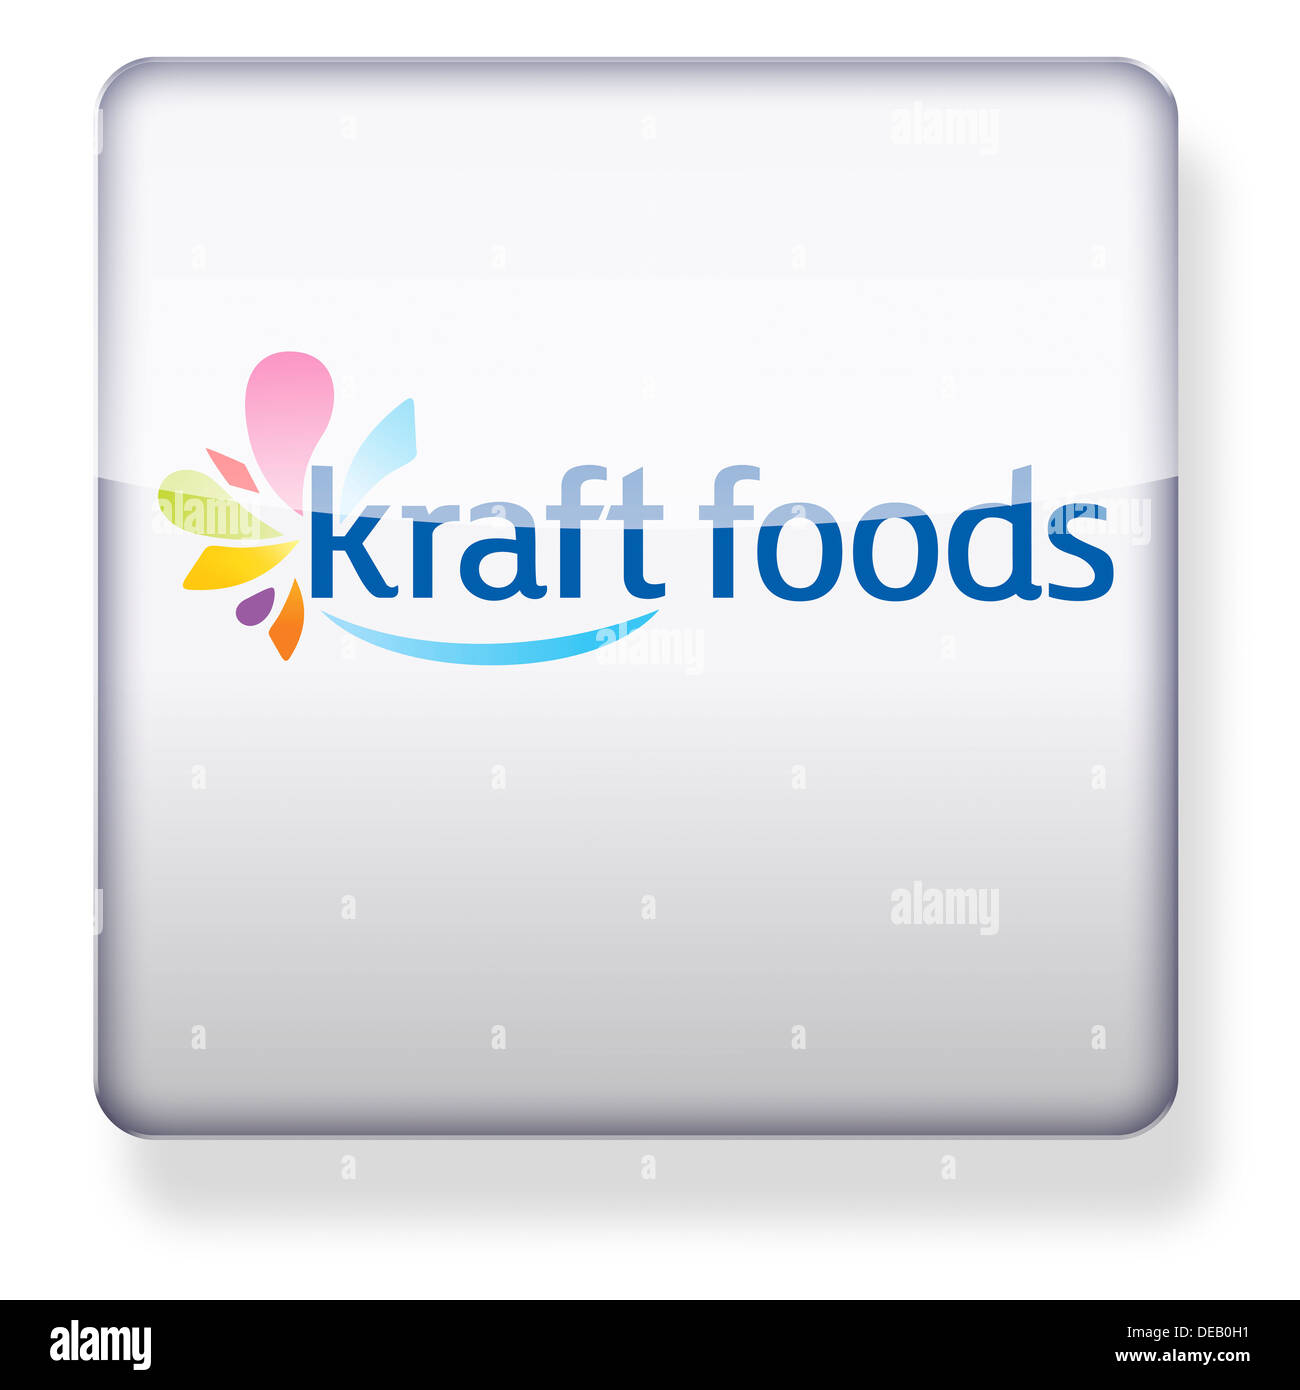 Kraft Foods logo as an app icon. Clipping path included. Stock Photo